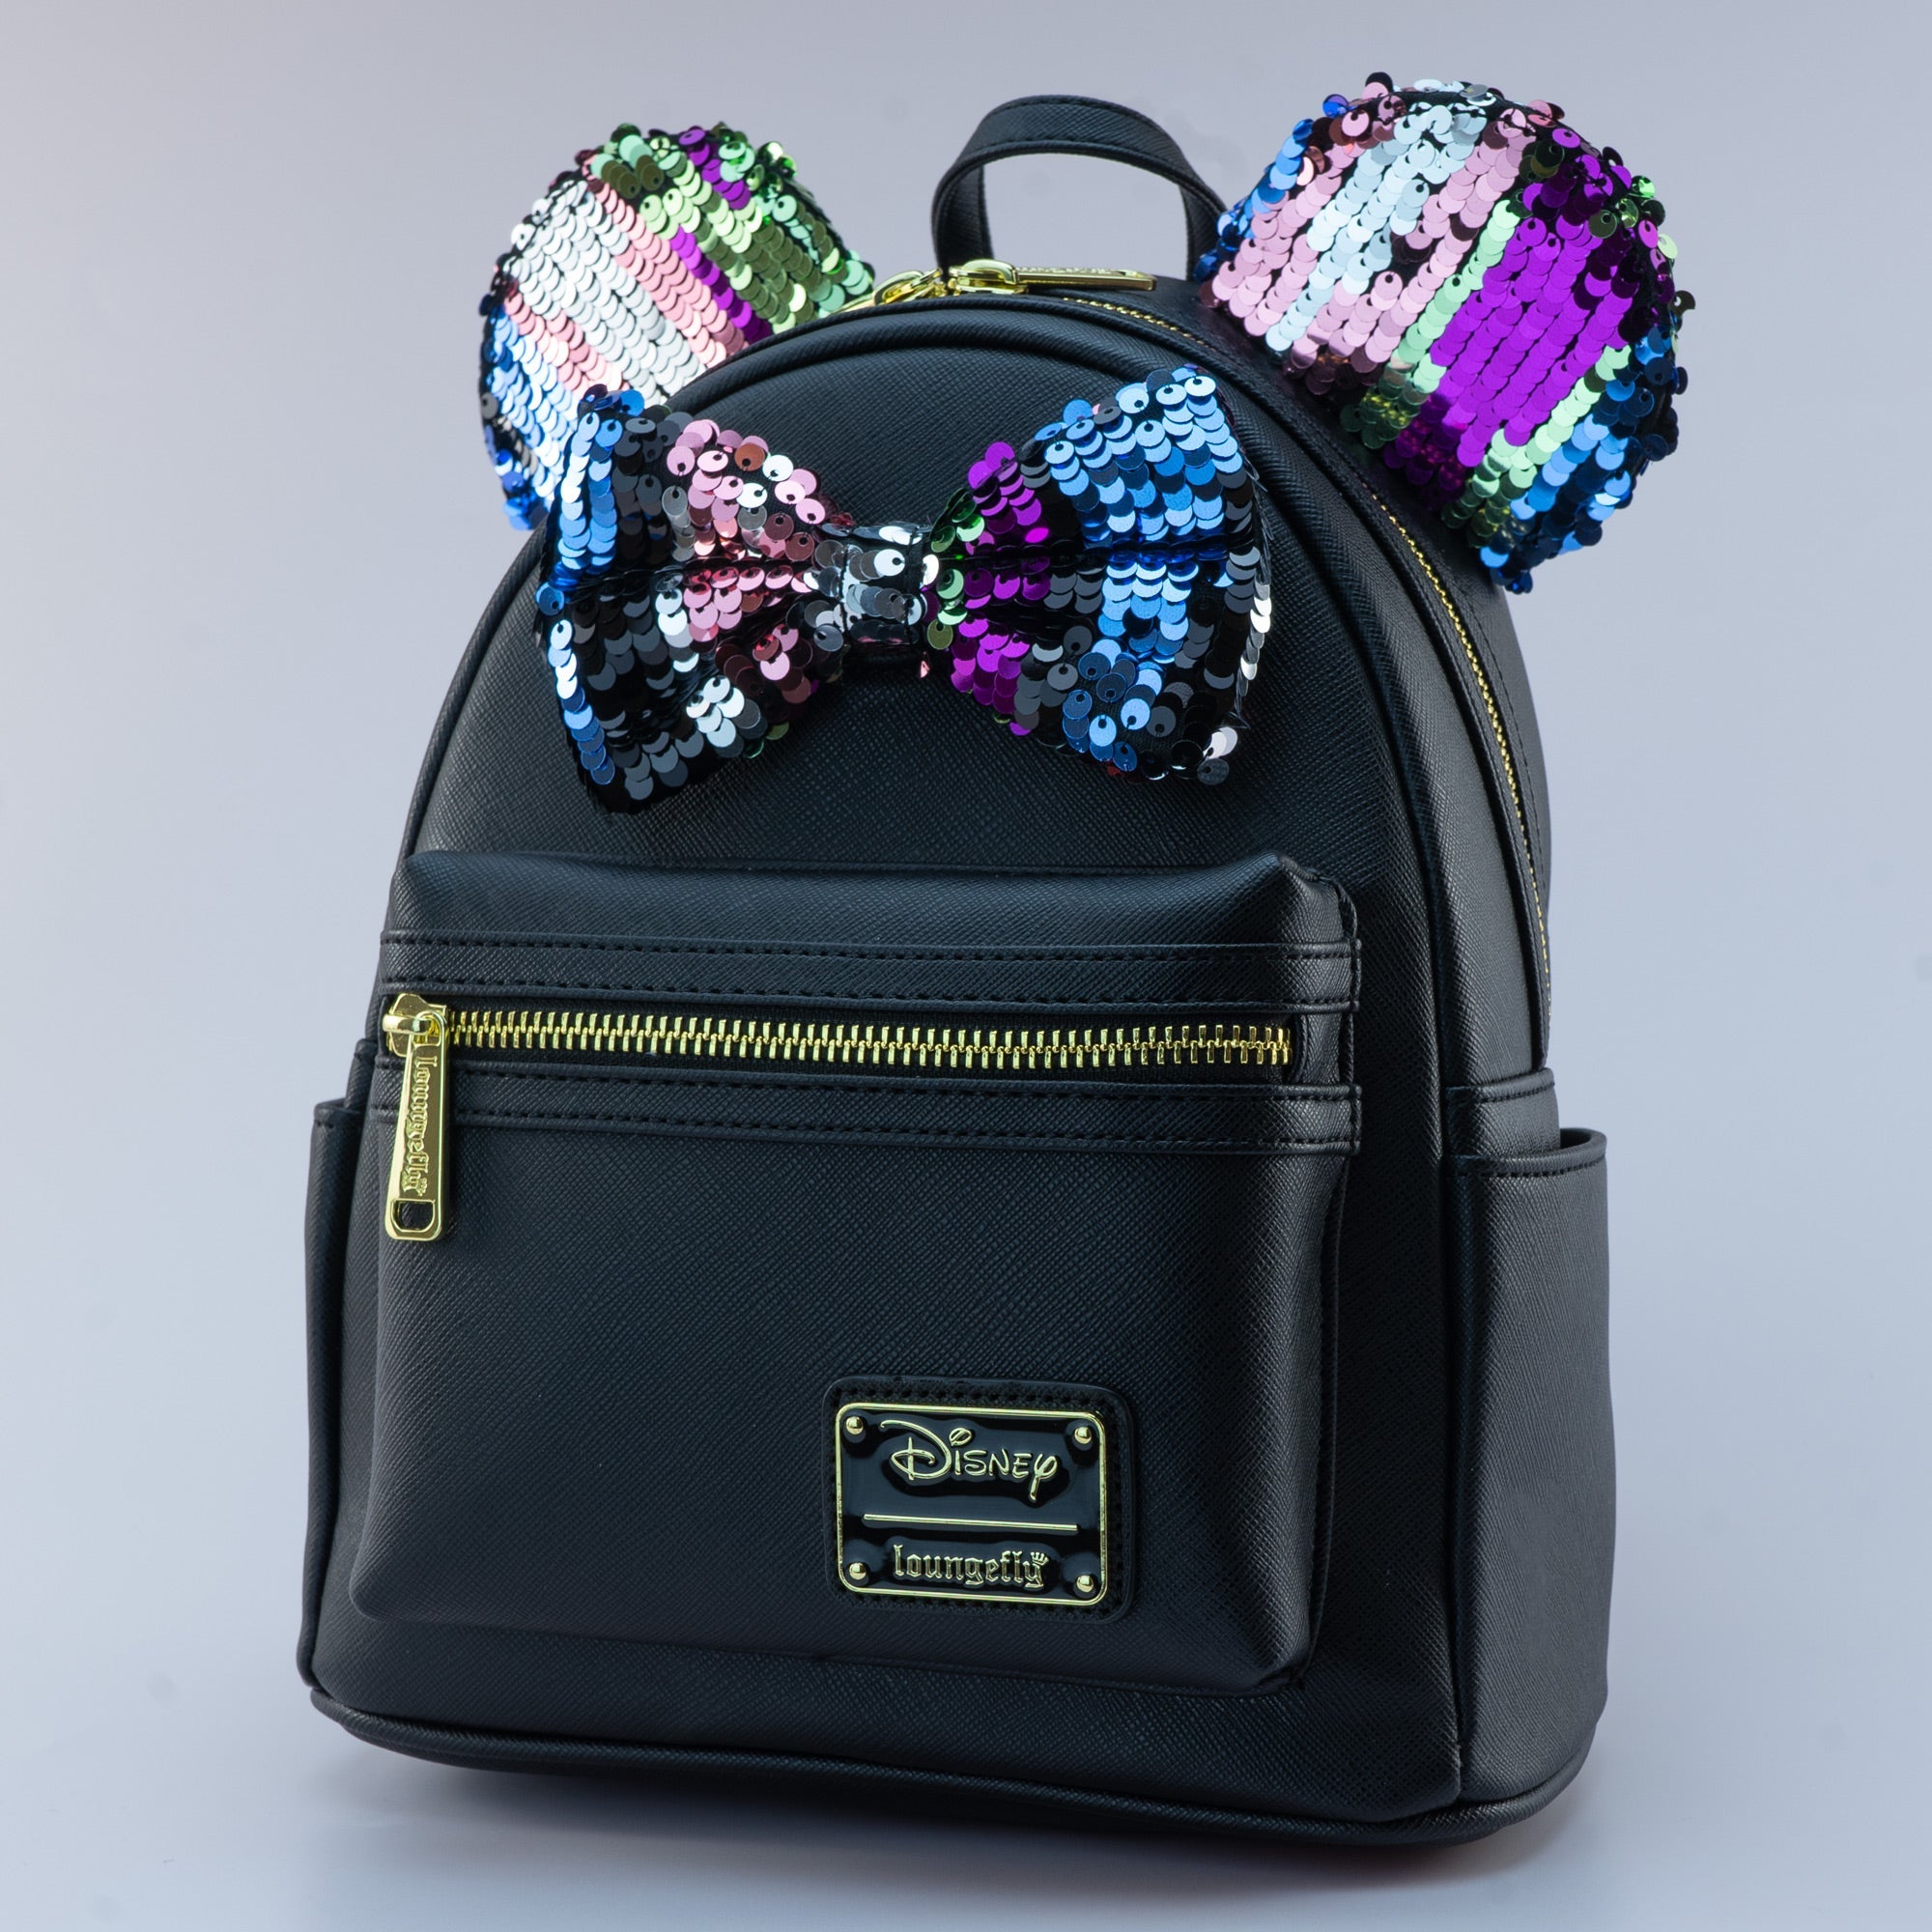 Loungefly x Disney Minnie Mouse Black Sequin Mini Backpack - GeekCore